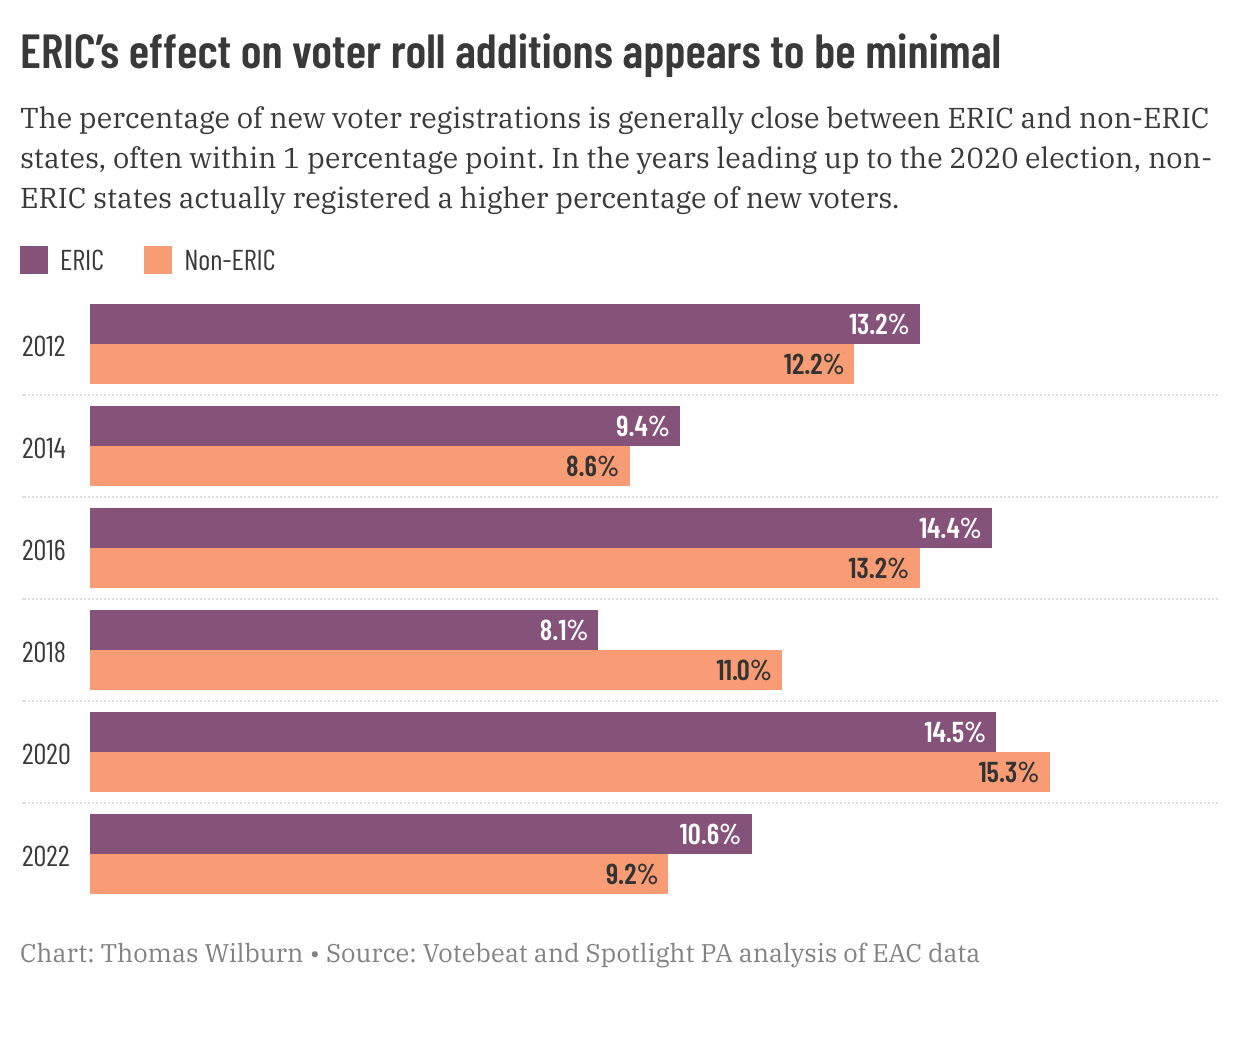 ERIC’s effect on voter roll additions appears to be minimal